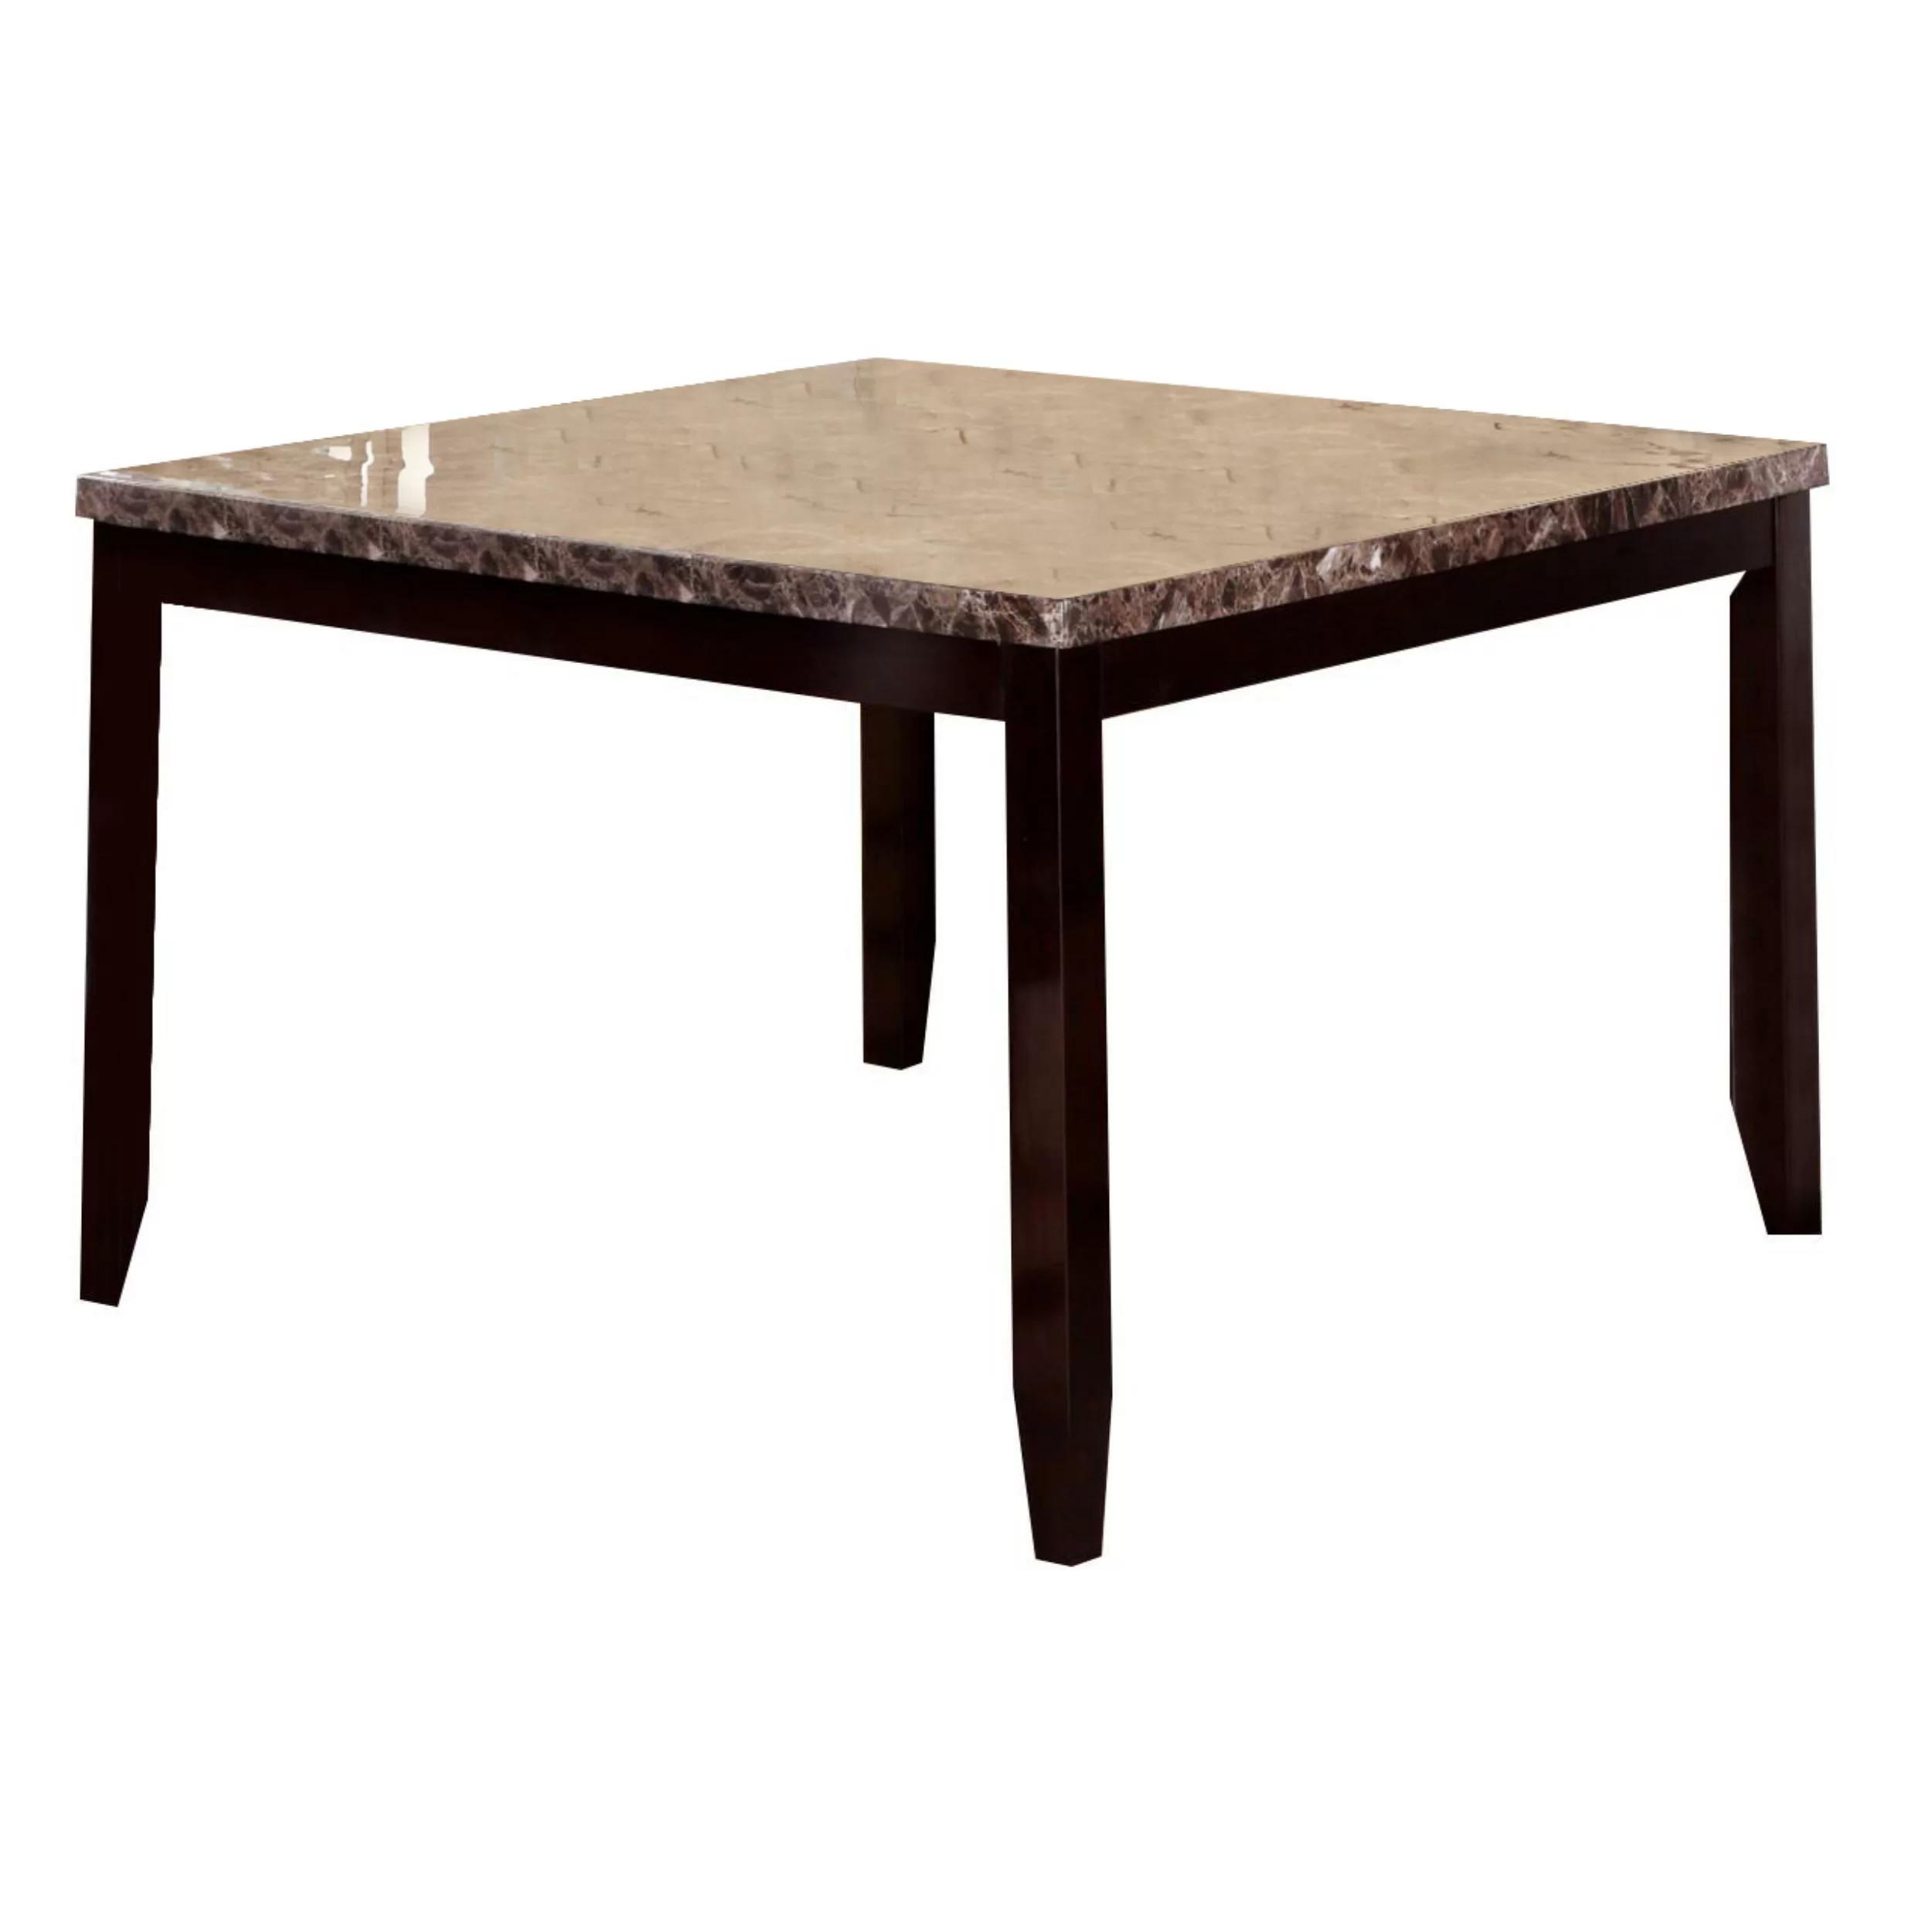 Traditional,  Vintage Counter Height Table Ferrara 2721T-5454 in Marble, Espresso 